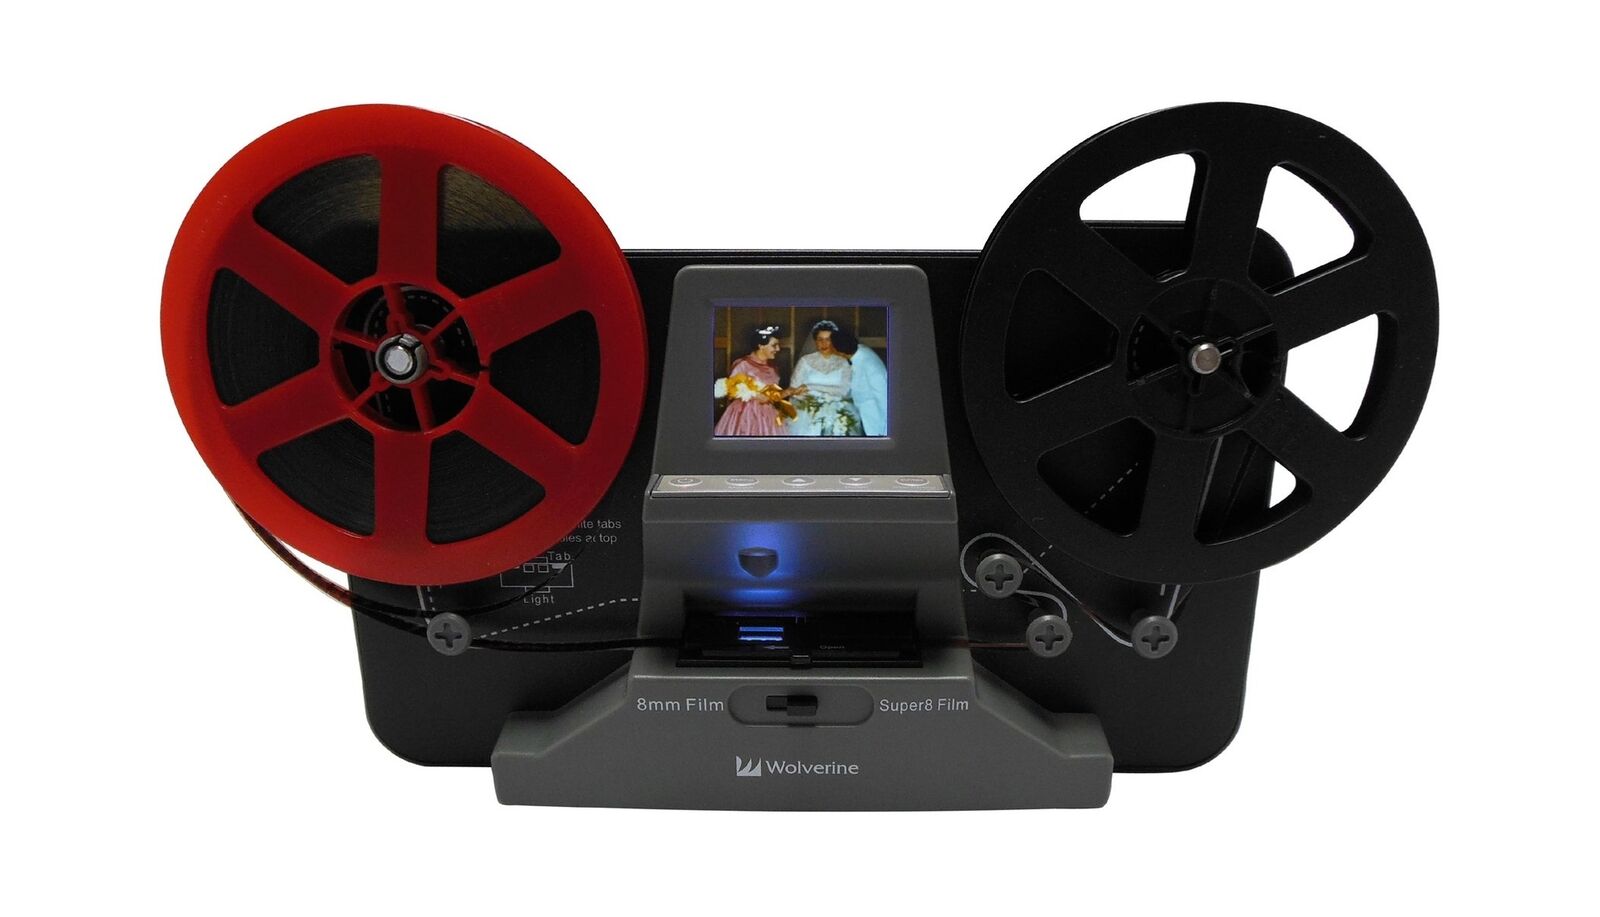 Wolverine 8mm and Super 8 Film Reel Converter Scanner to Convert Film into Di...